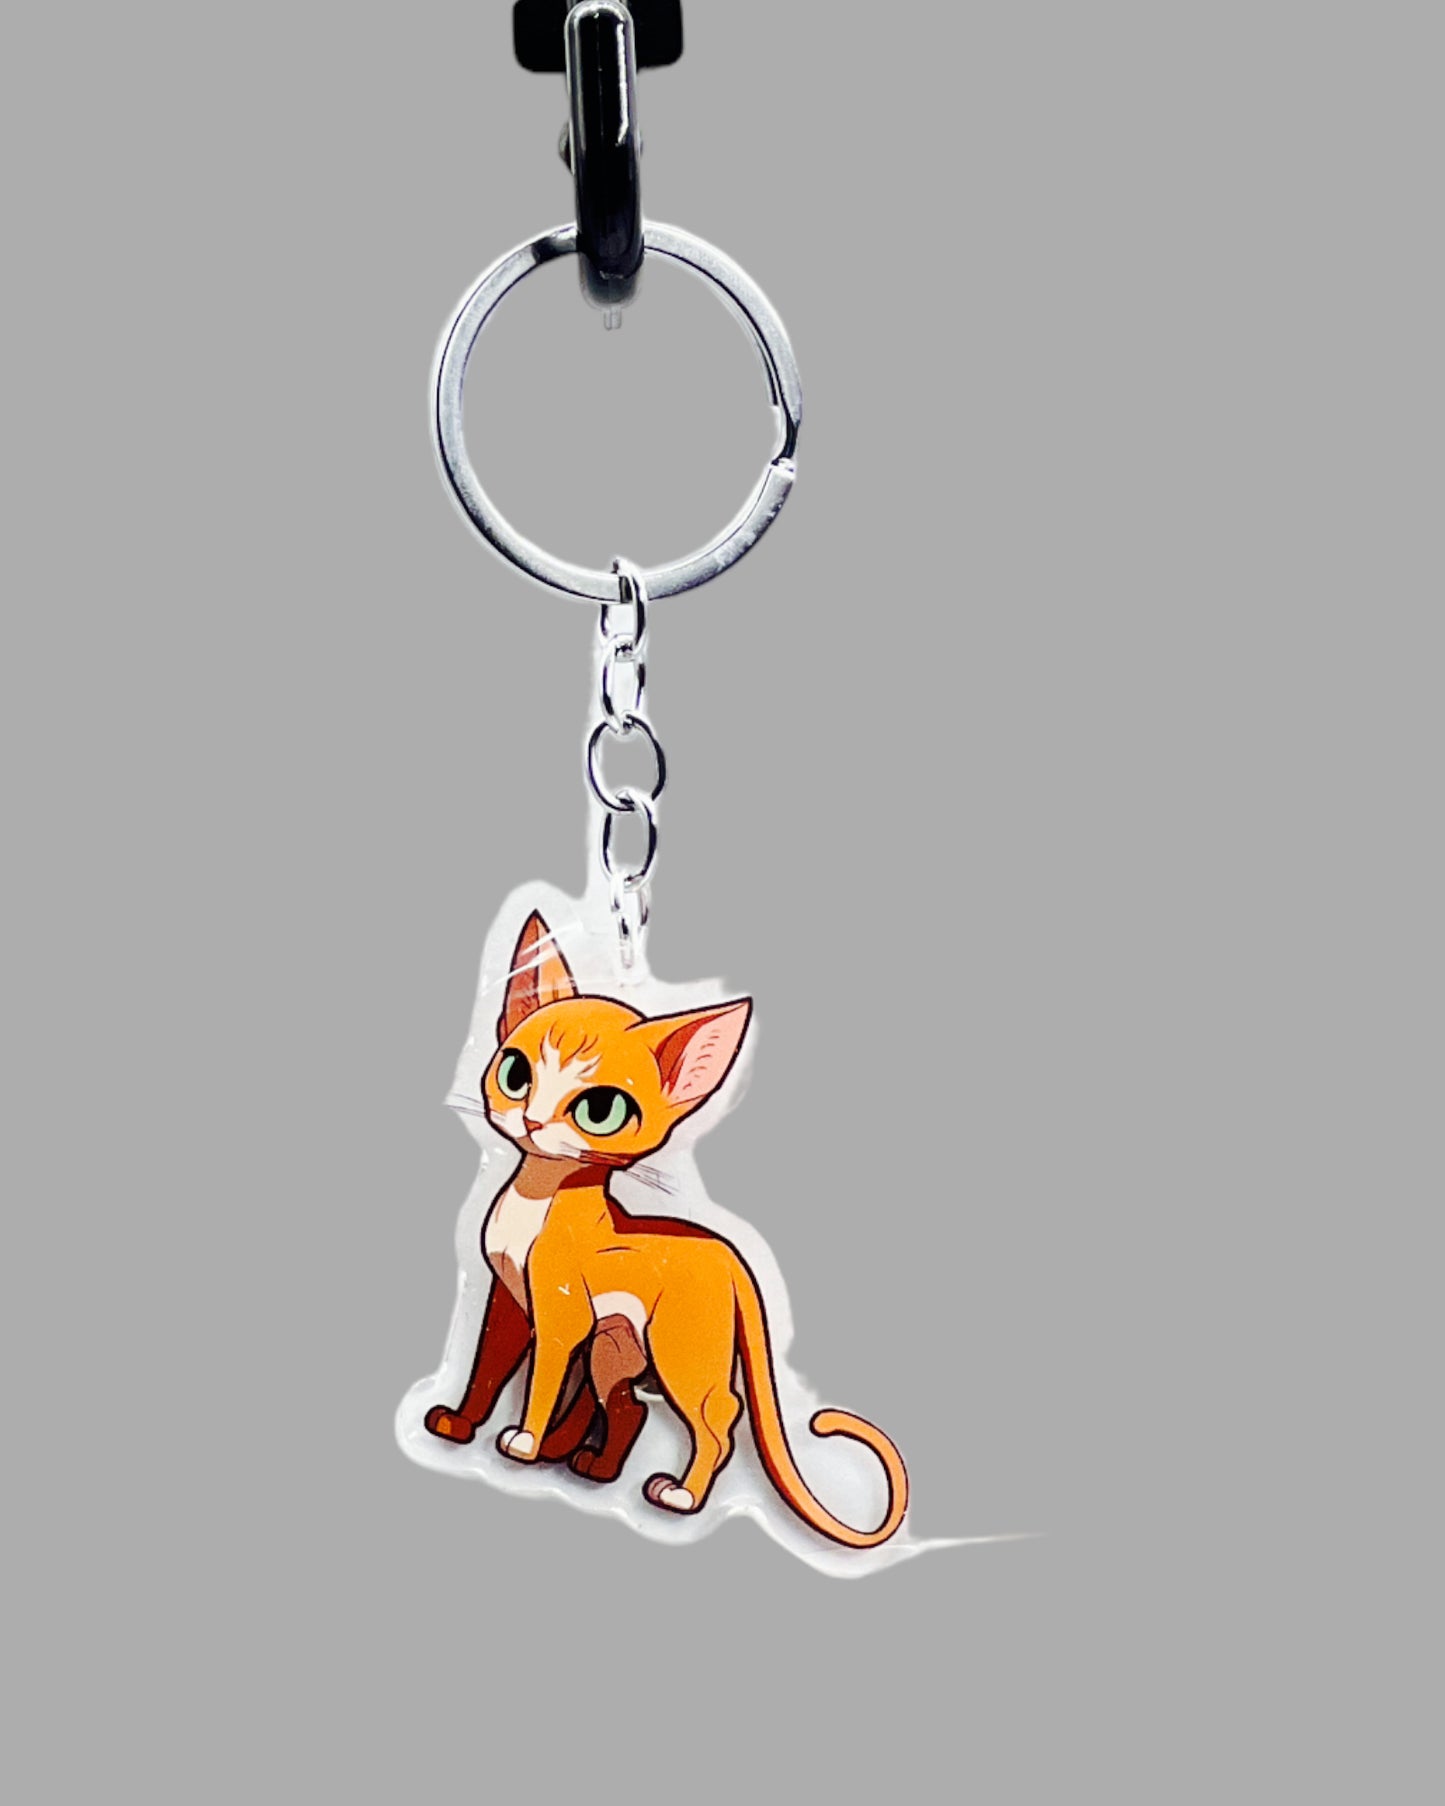 Abyssinian Cat Acrylic keychain, Cute kawaii memorial ornament, pet portrait charm gift of animal crossing, backpack photo fob or dad car décor